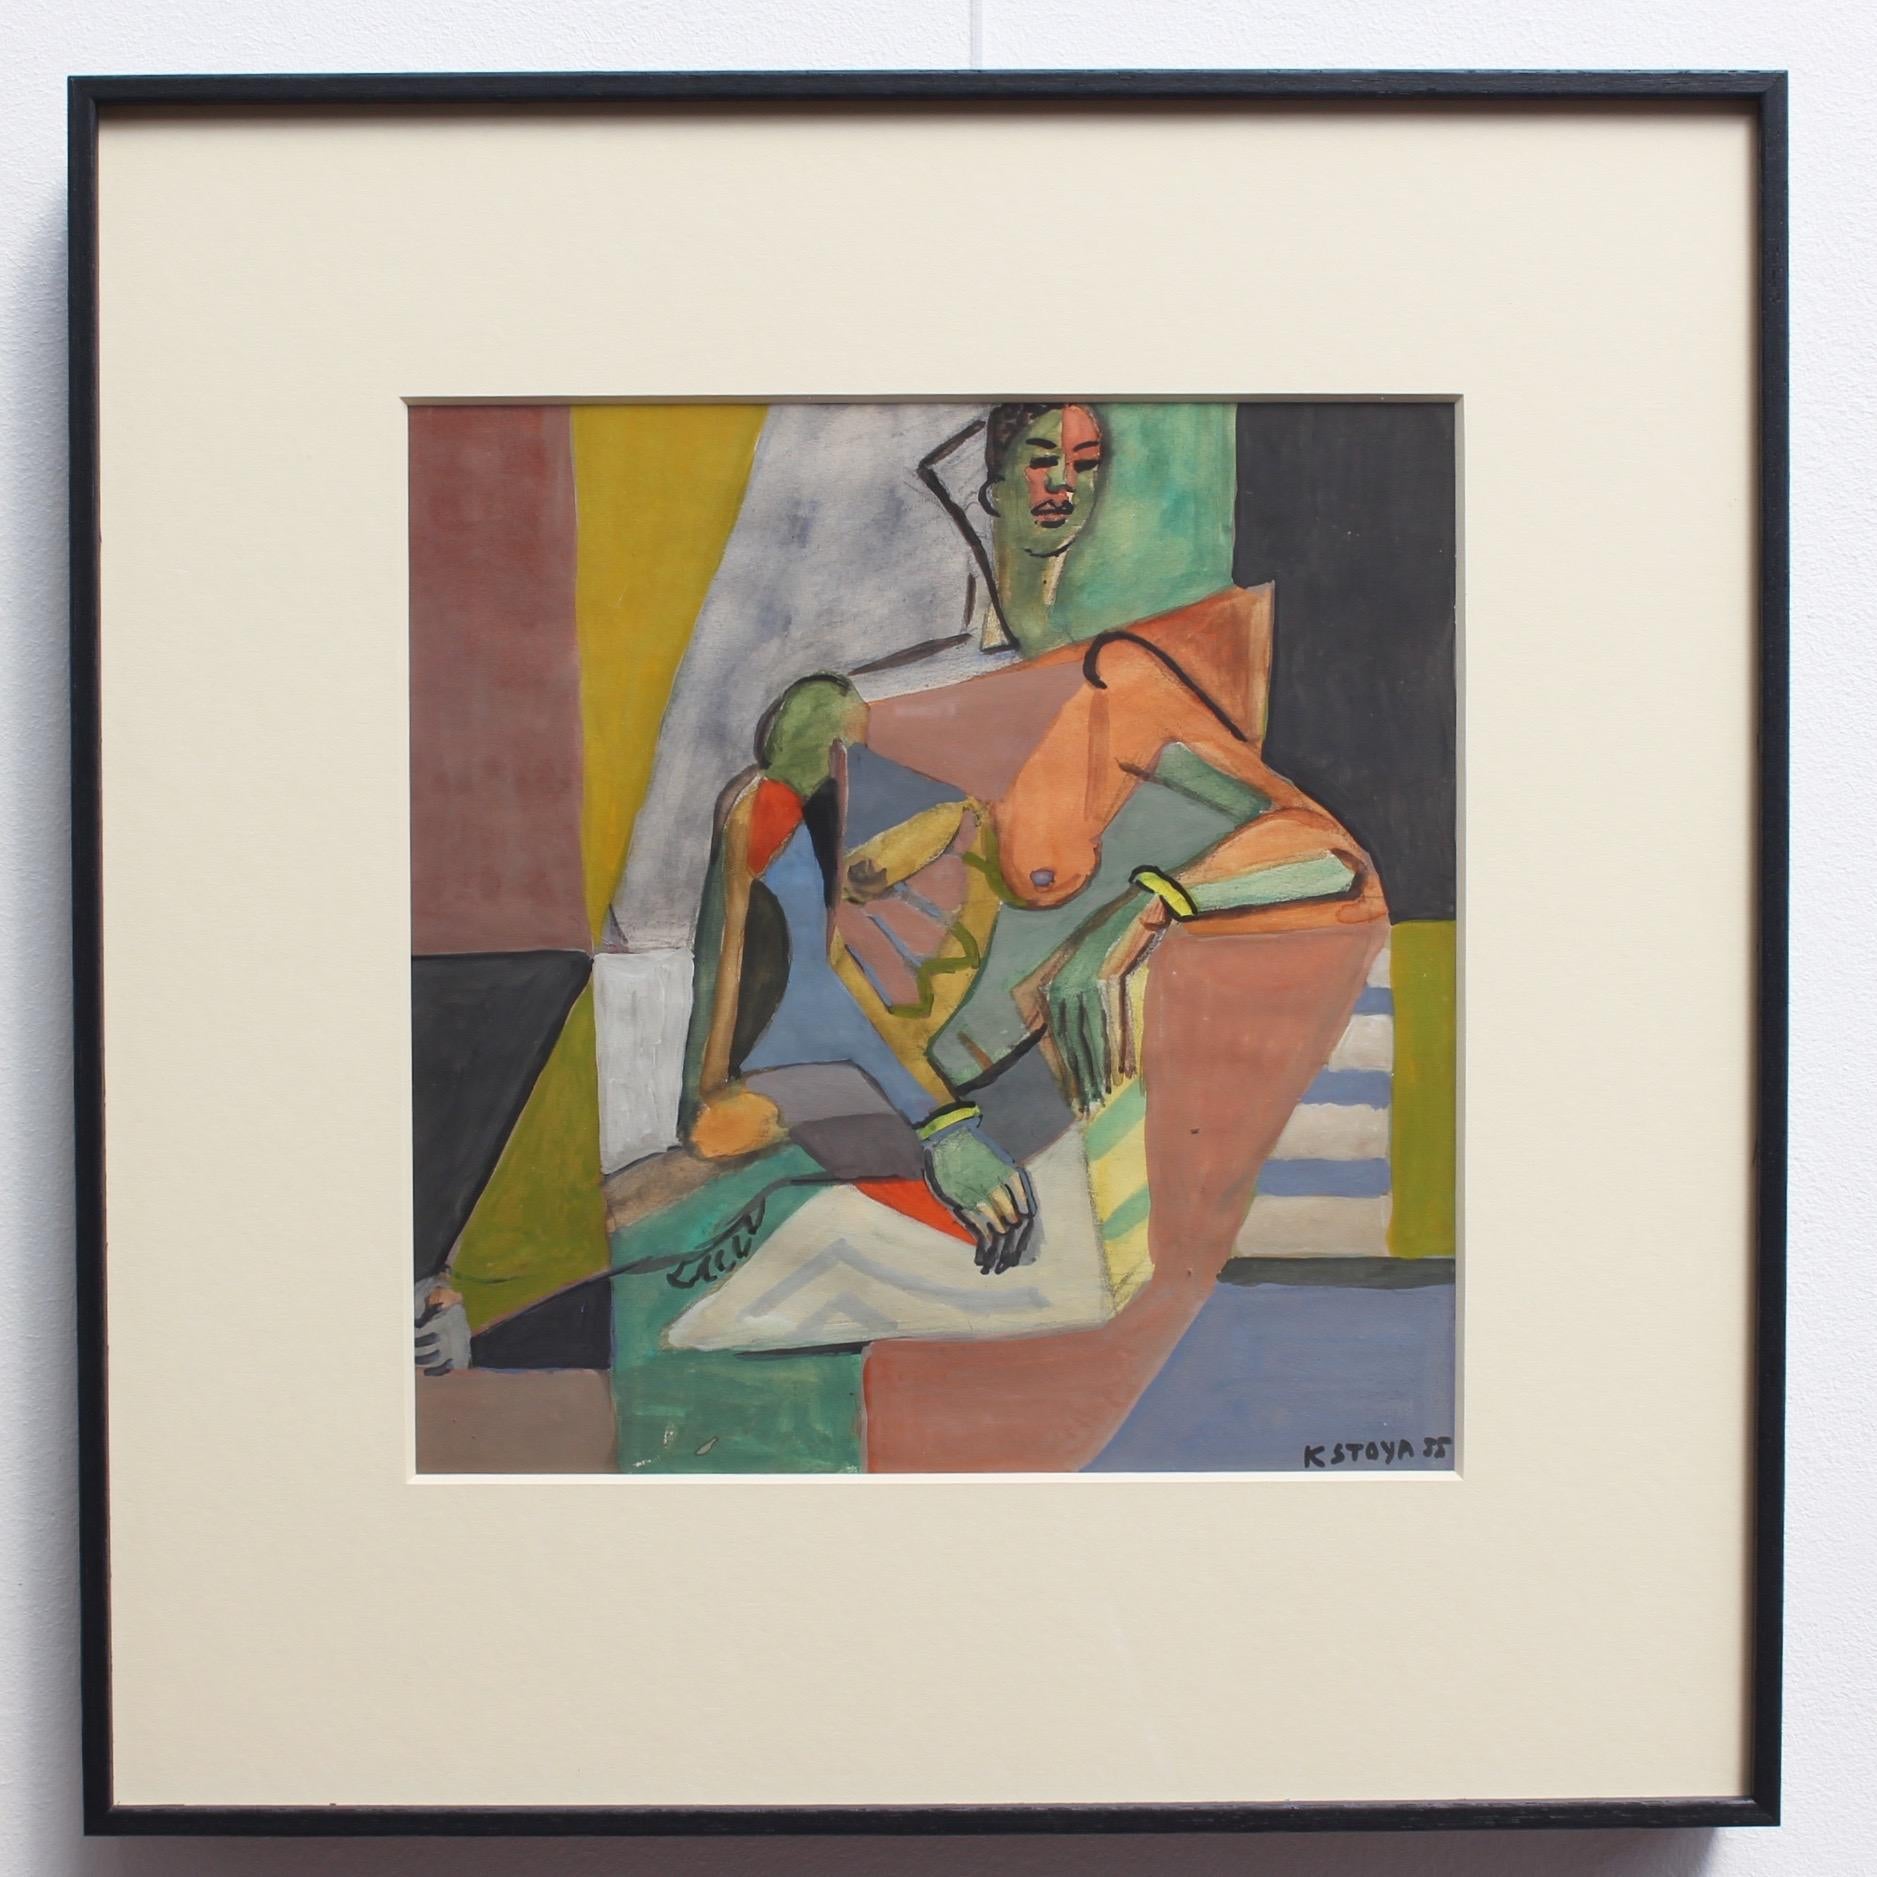 A cubist nude portrait of a seated woman, in gouache on fine art paper (1955), by artist Kosta Stojanovitch. This work is one in a series of four images. Here, an imposing woman lounges comfortably on a modern chair in a pose for the artist wearing